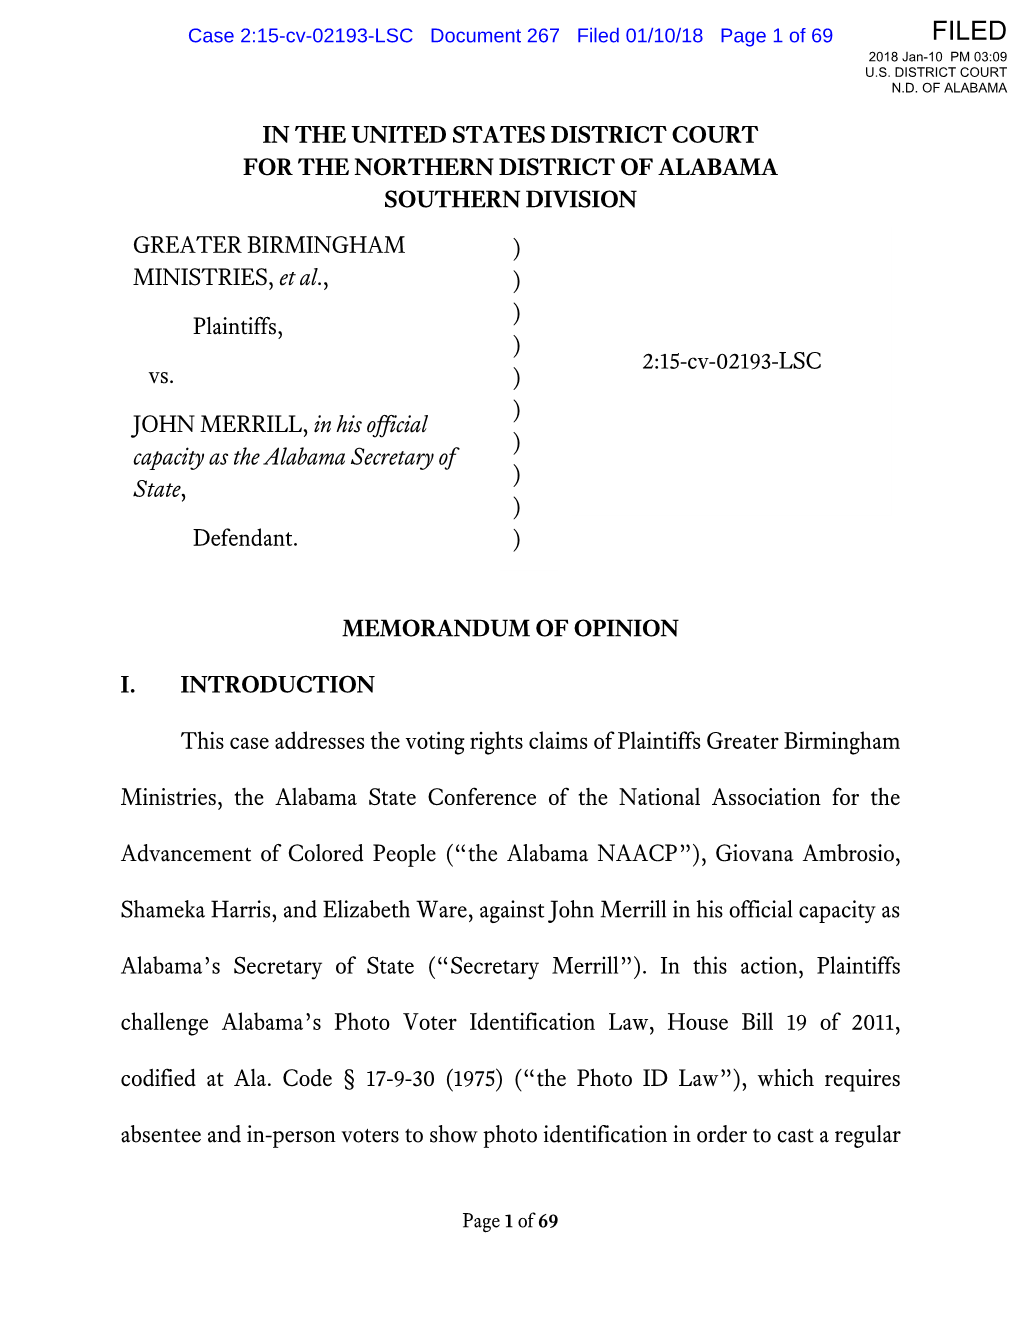 In the United States District Court for the Northern District of Alabama Southern Division